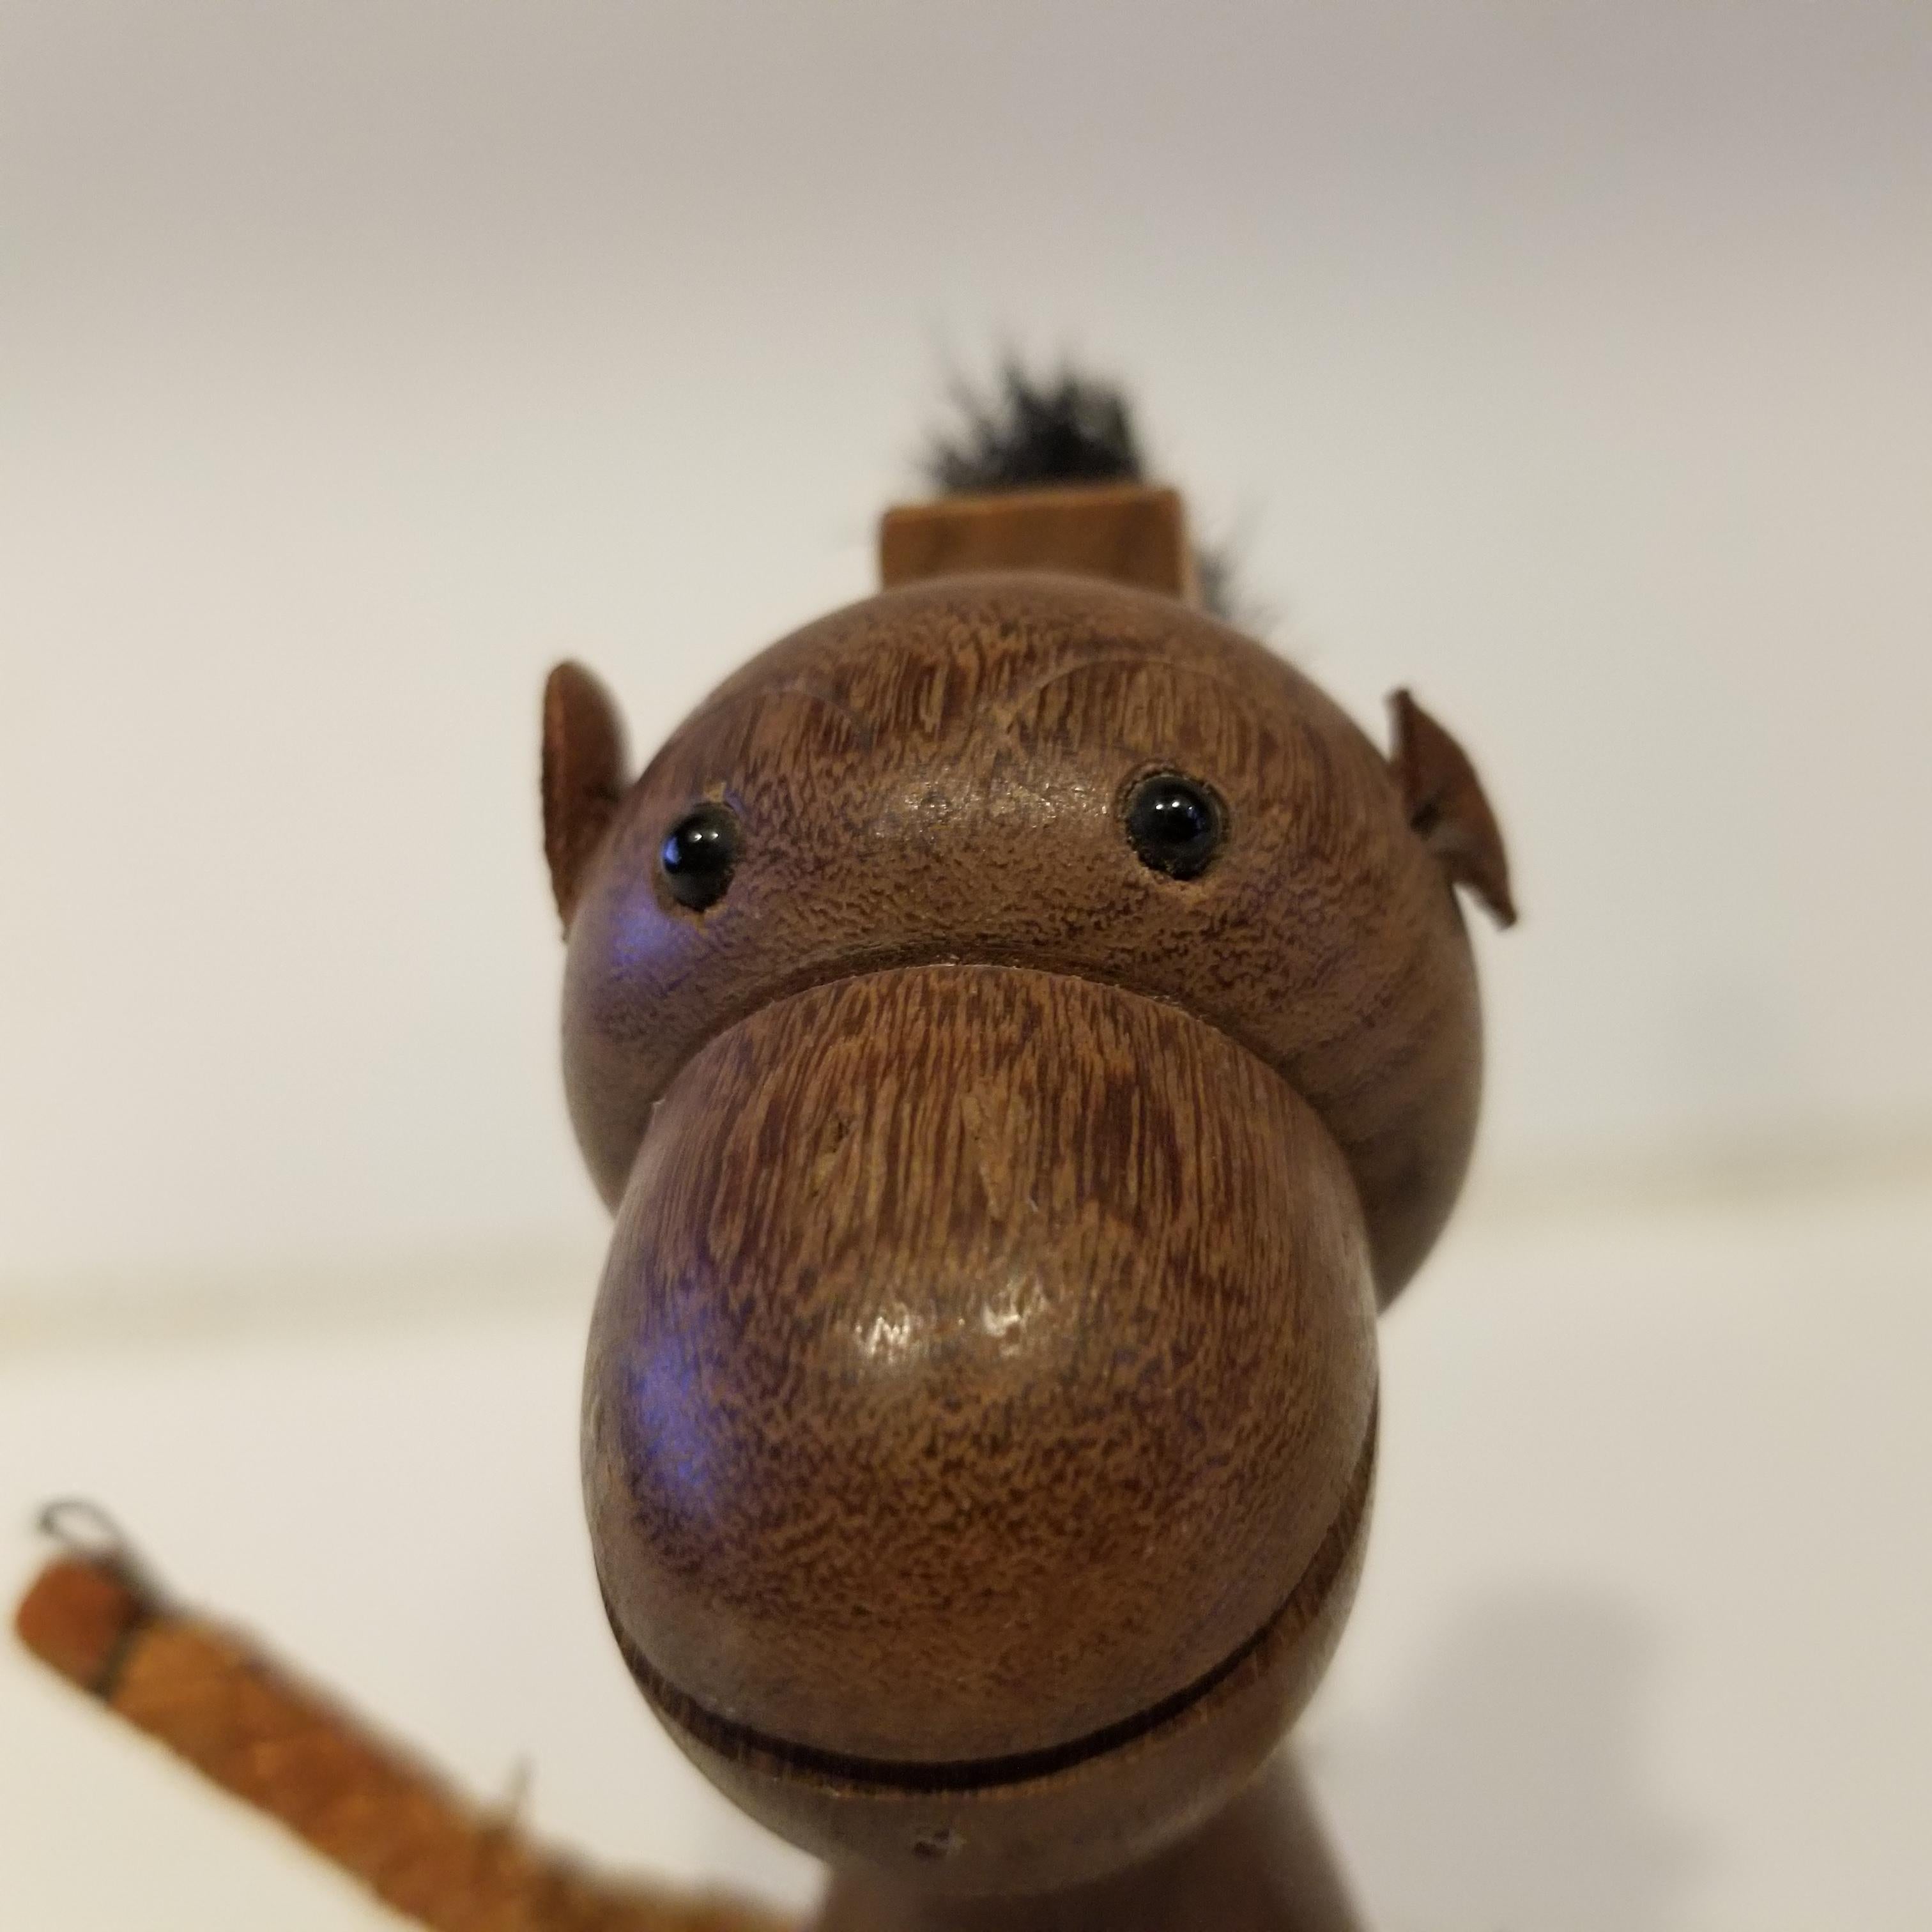 Mid-Century Modern squirrel animal figure in teak wood functions as a clothing or shoe brush.
Tail serves as the Brush. Cute guy has leather ears Rope arms and Glass eyes.
Stamped Made in Italy circa 1960s 
Measures: 5